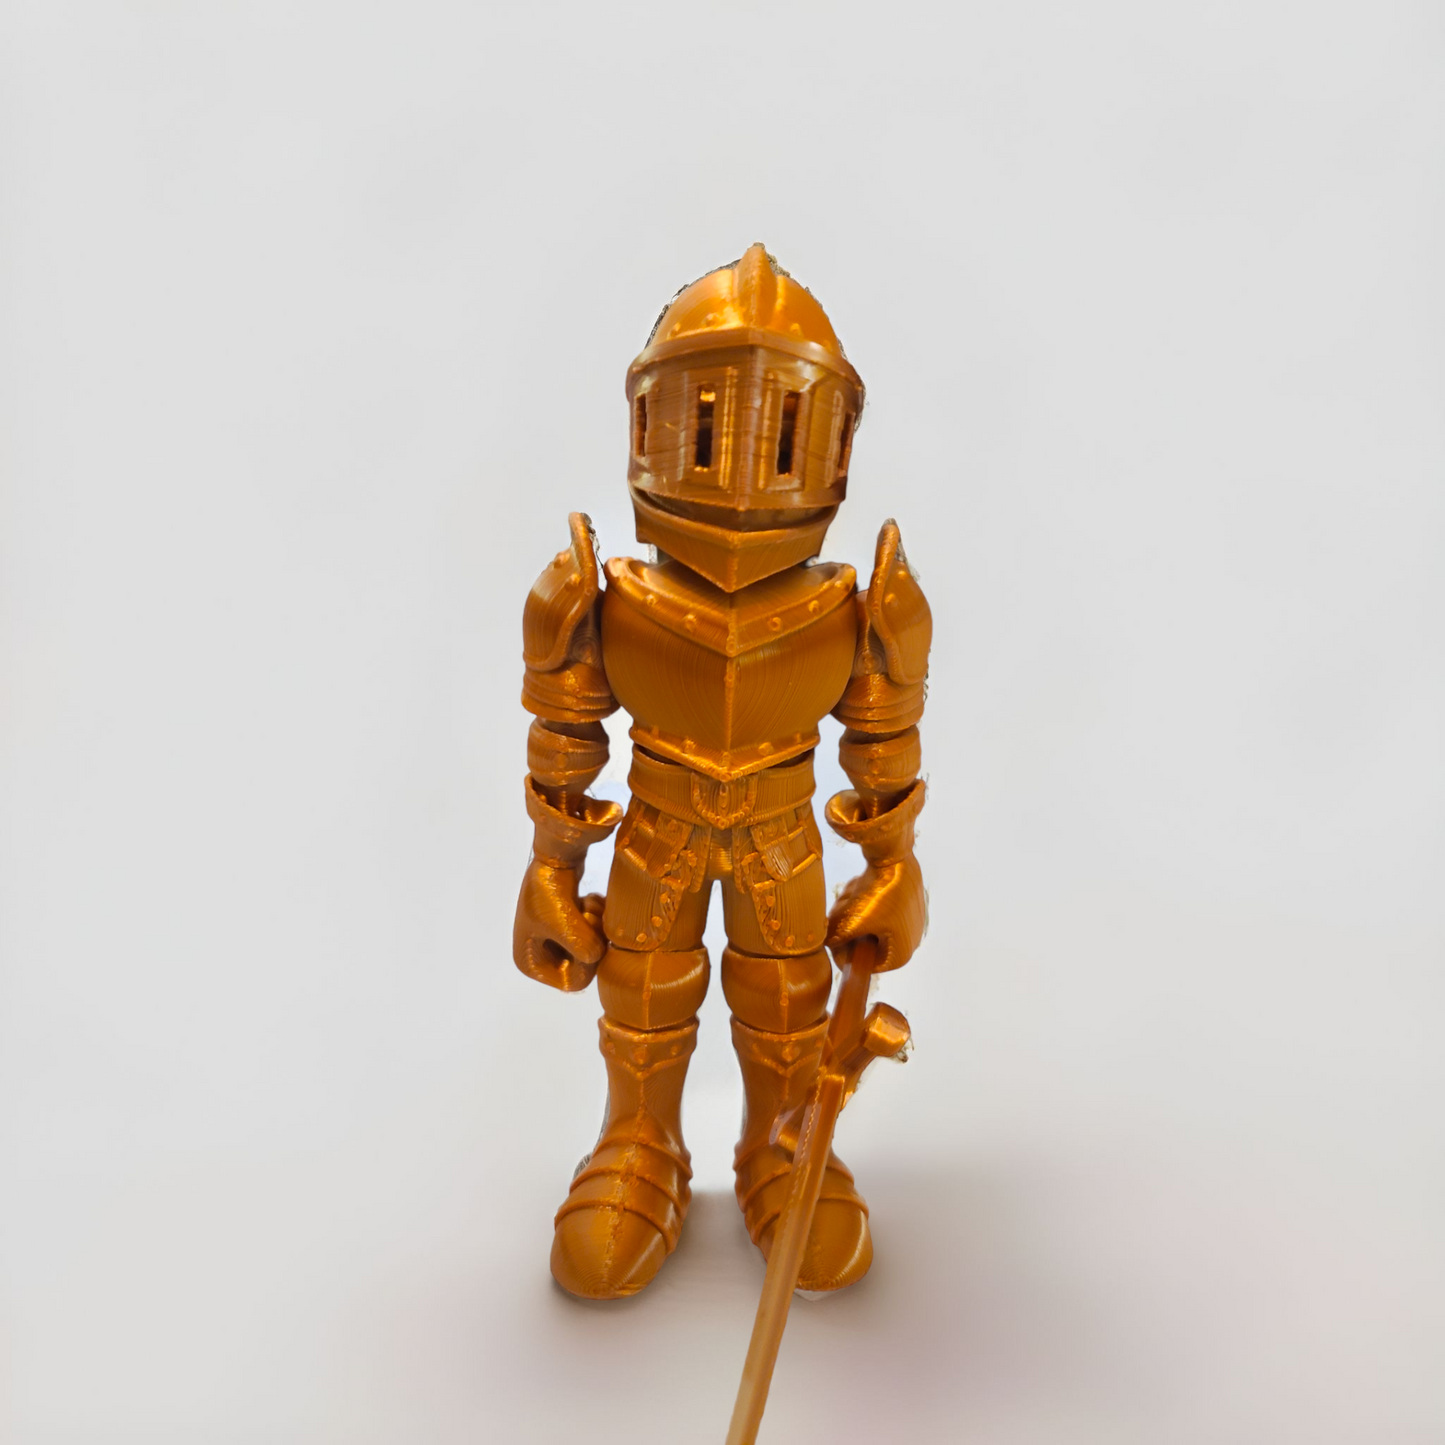 3D Printed Articulated Knight